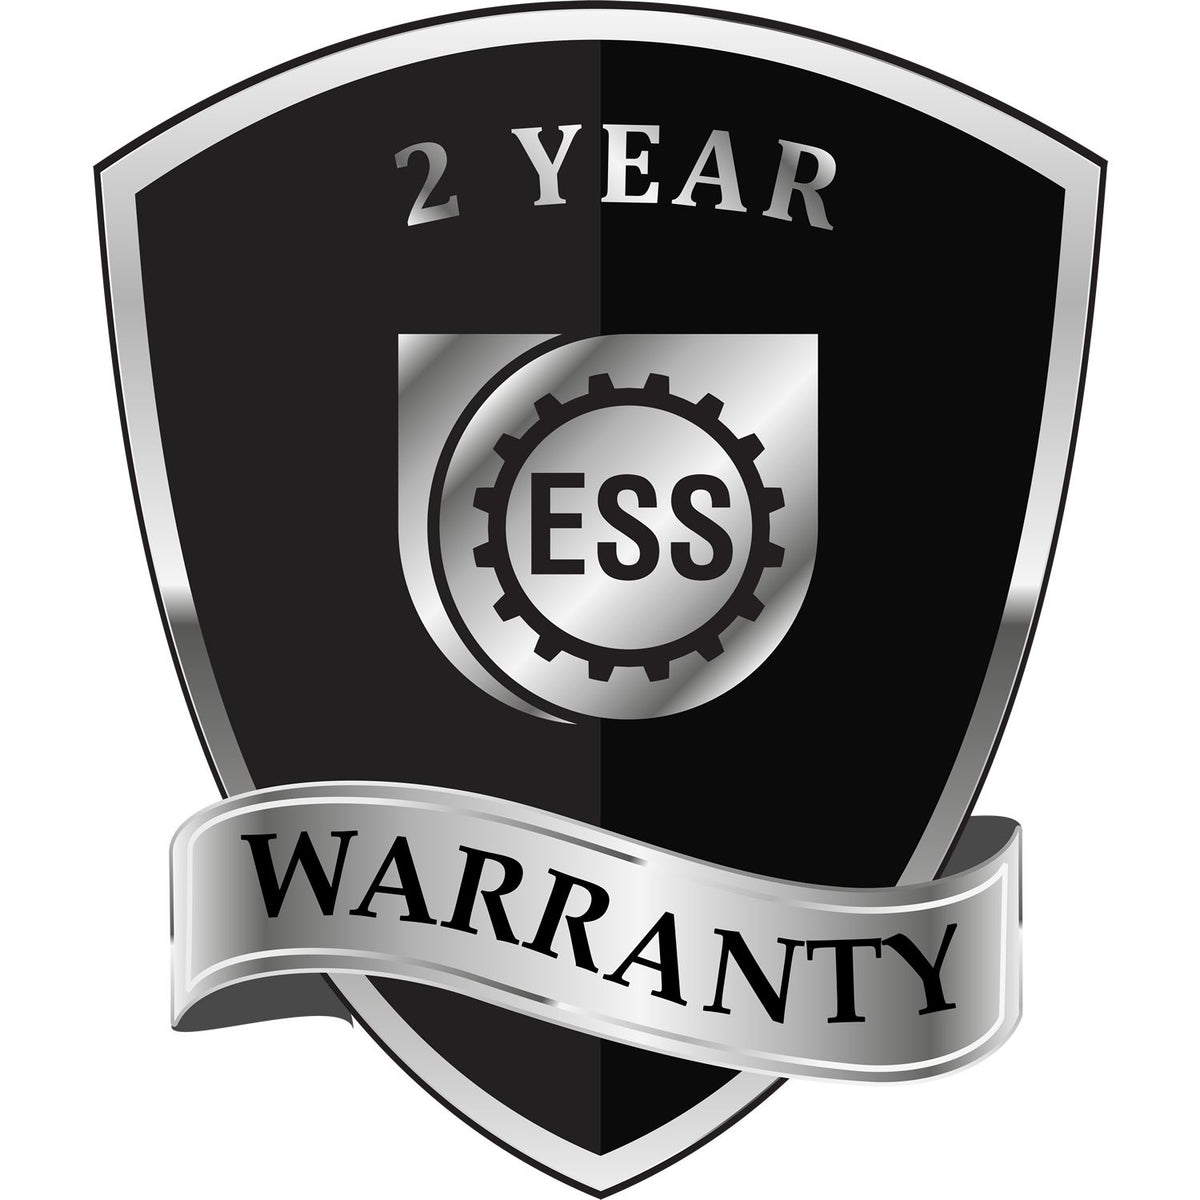 A badge or emblem showing a warranty icon for the Handheld Minnesota Land Surveyor Seal